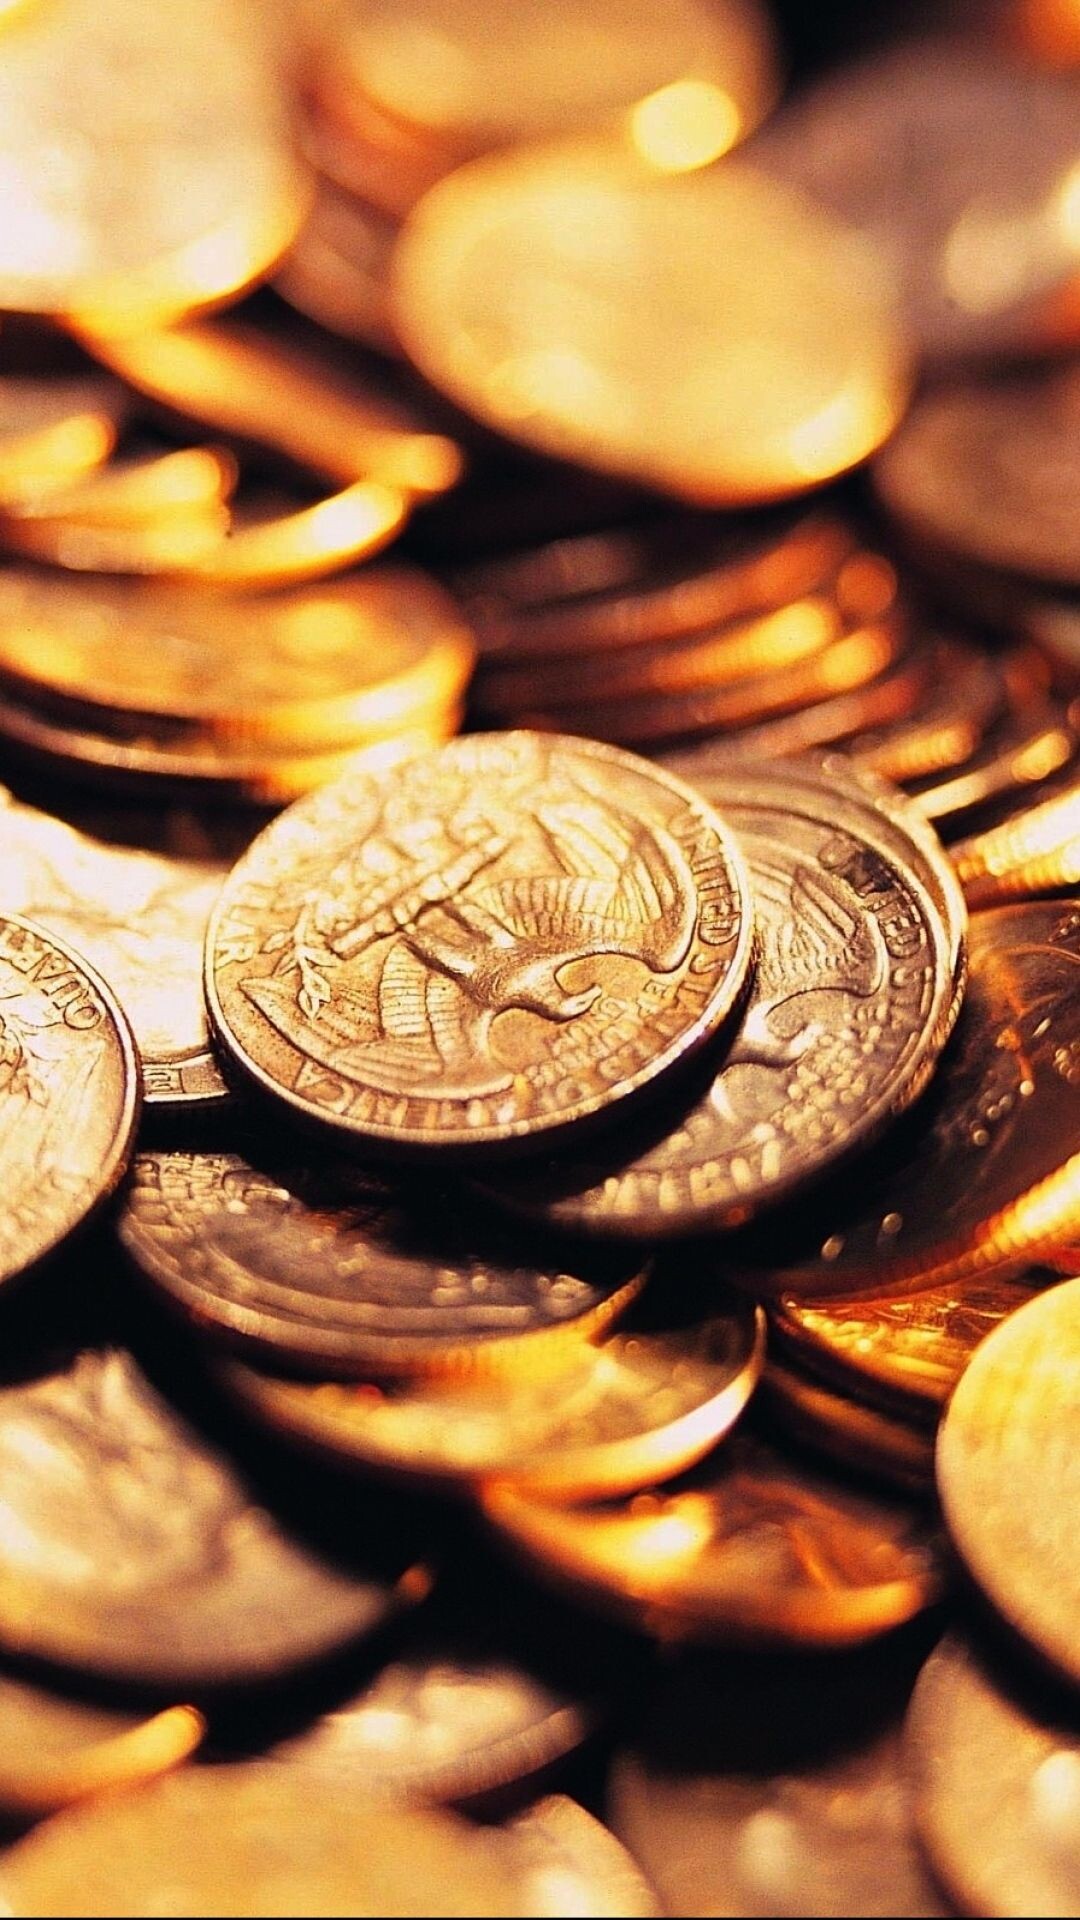 Coin Wallpapers, Currency illustrations, Money concepts, Numismatic beauty, 1080x1920 Full HD Phone